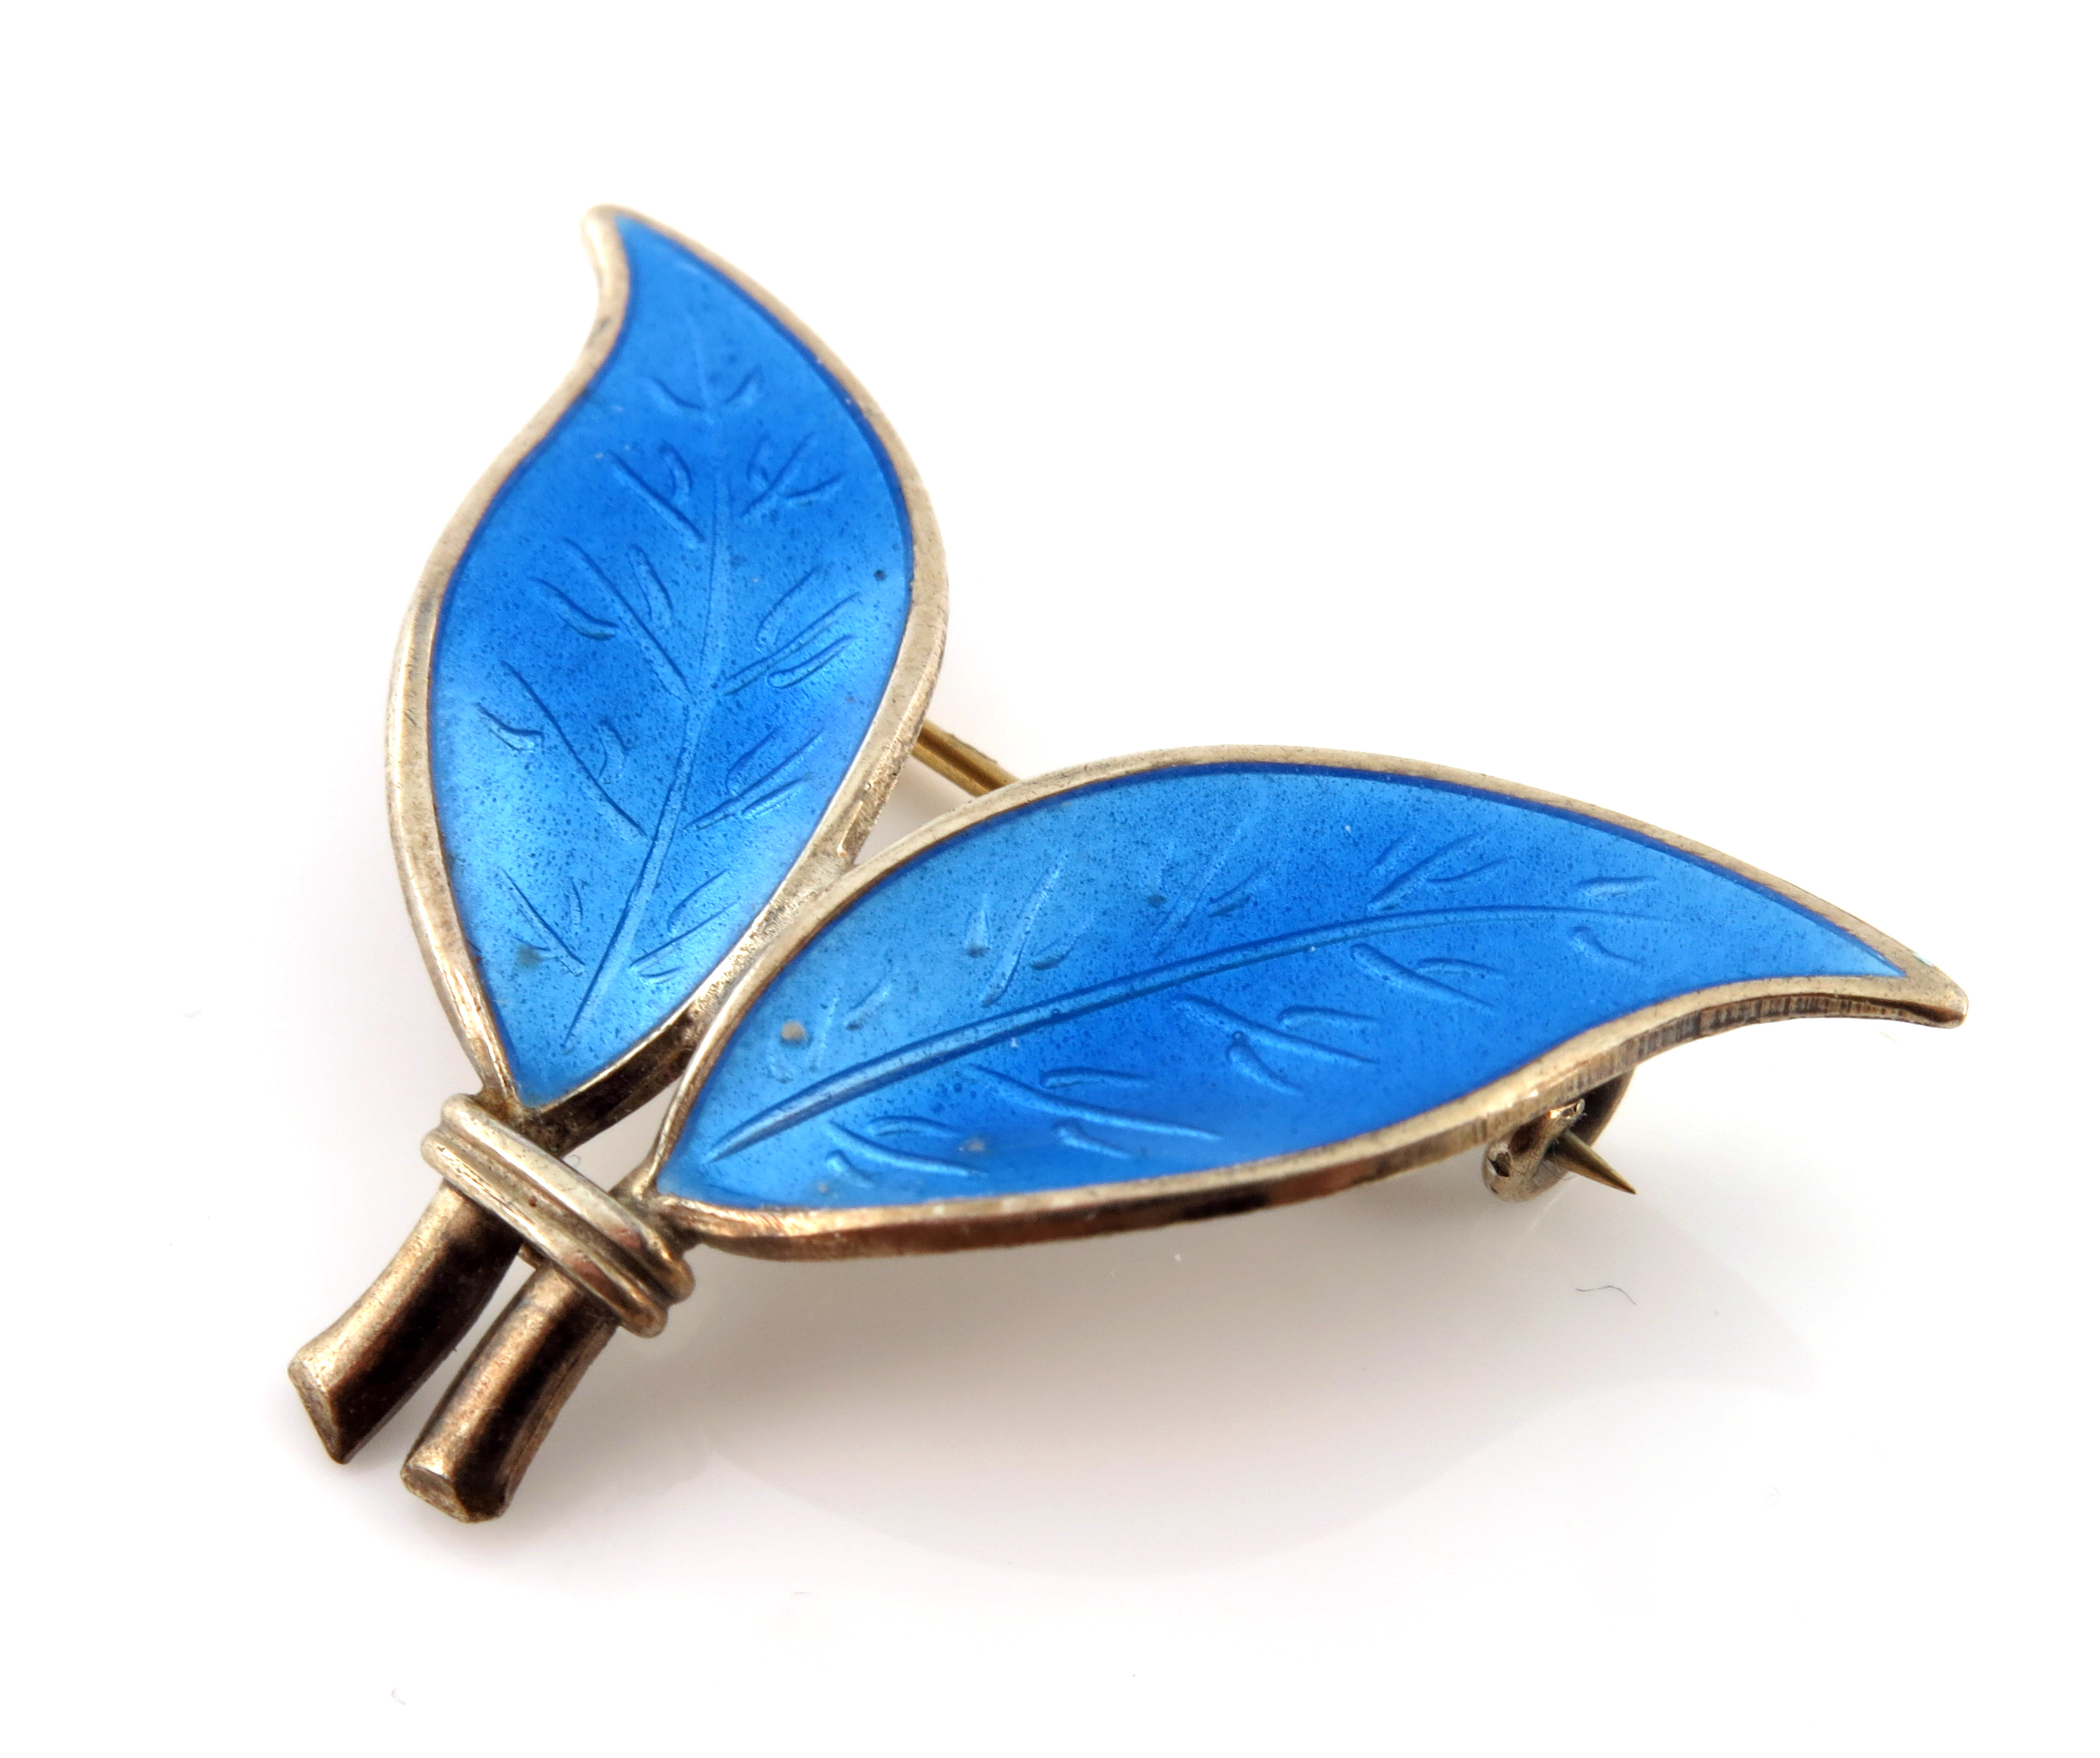 Willy Winnaess for David Andersen, a Norwegian silver gilt and enamelled two leaf brooch